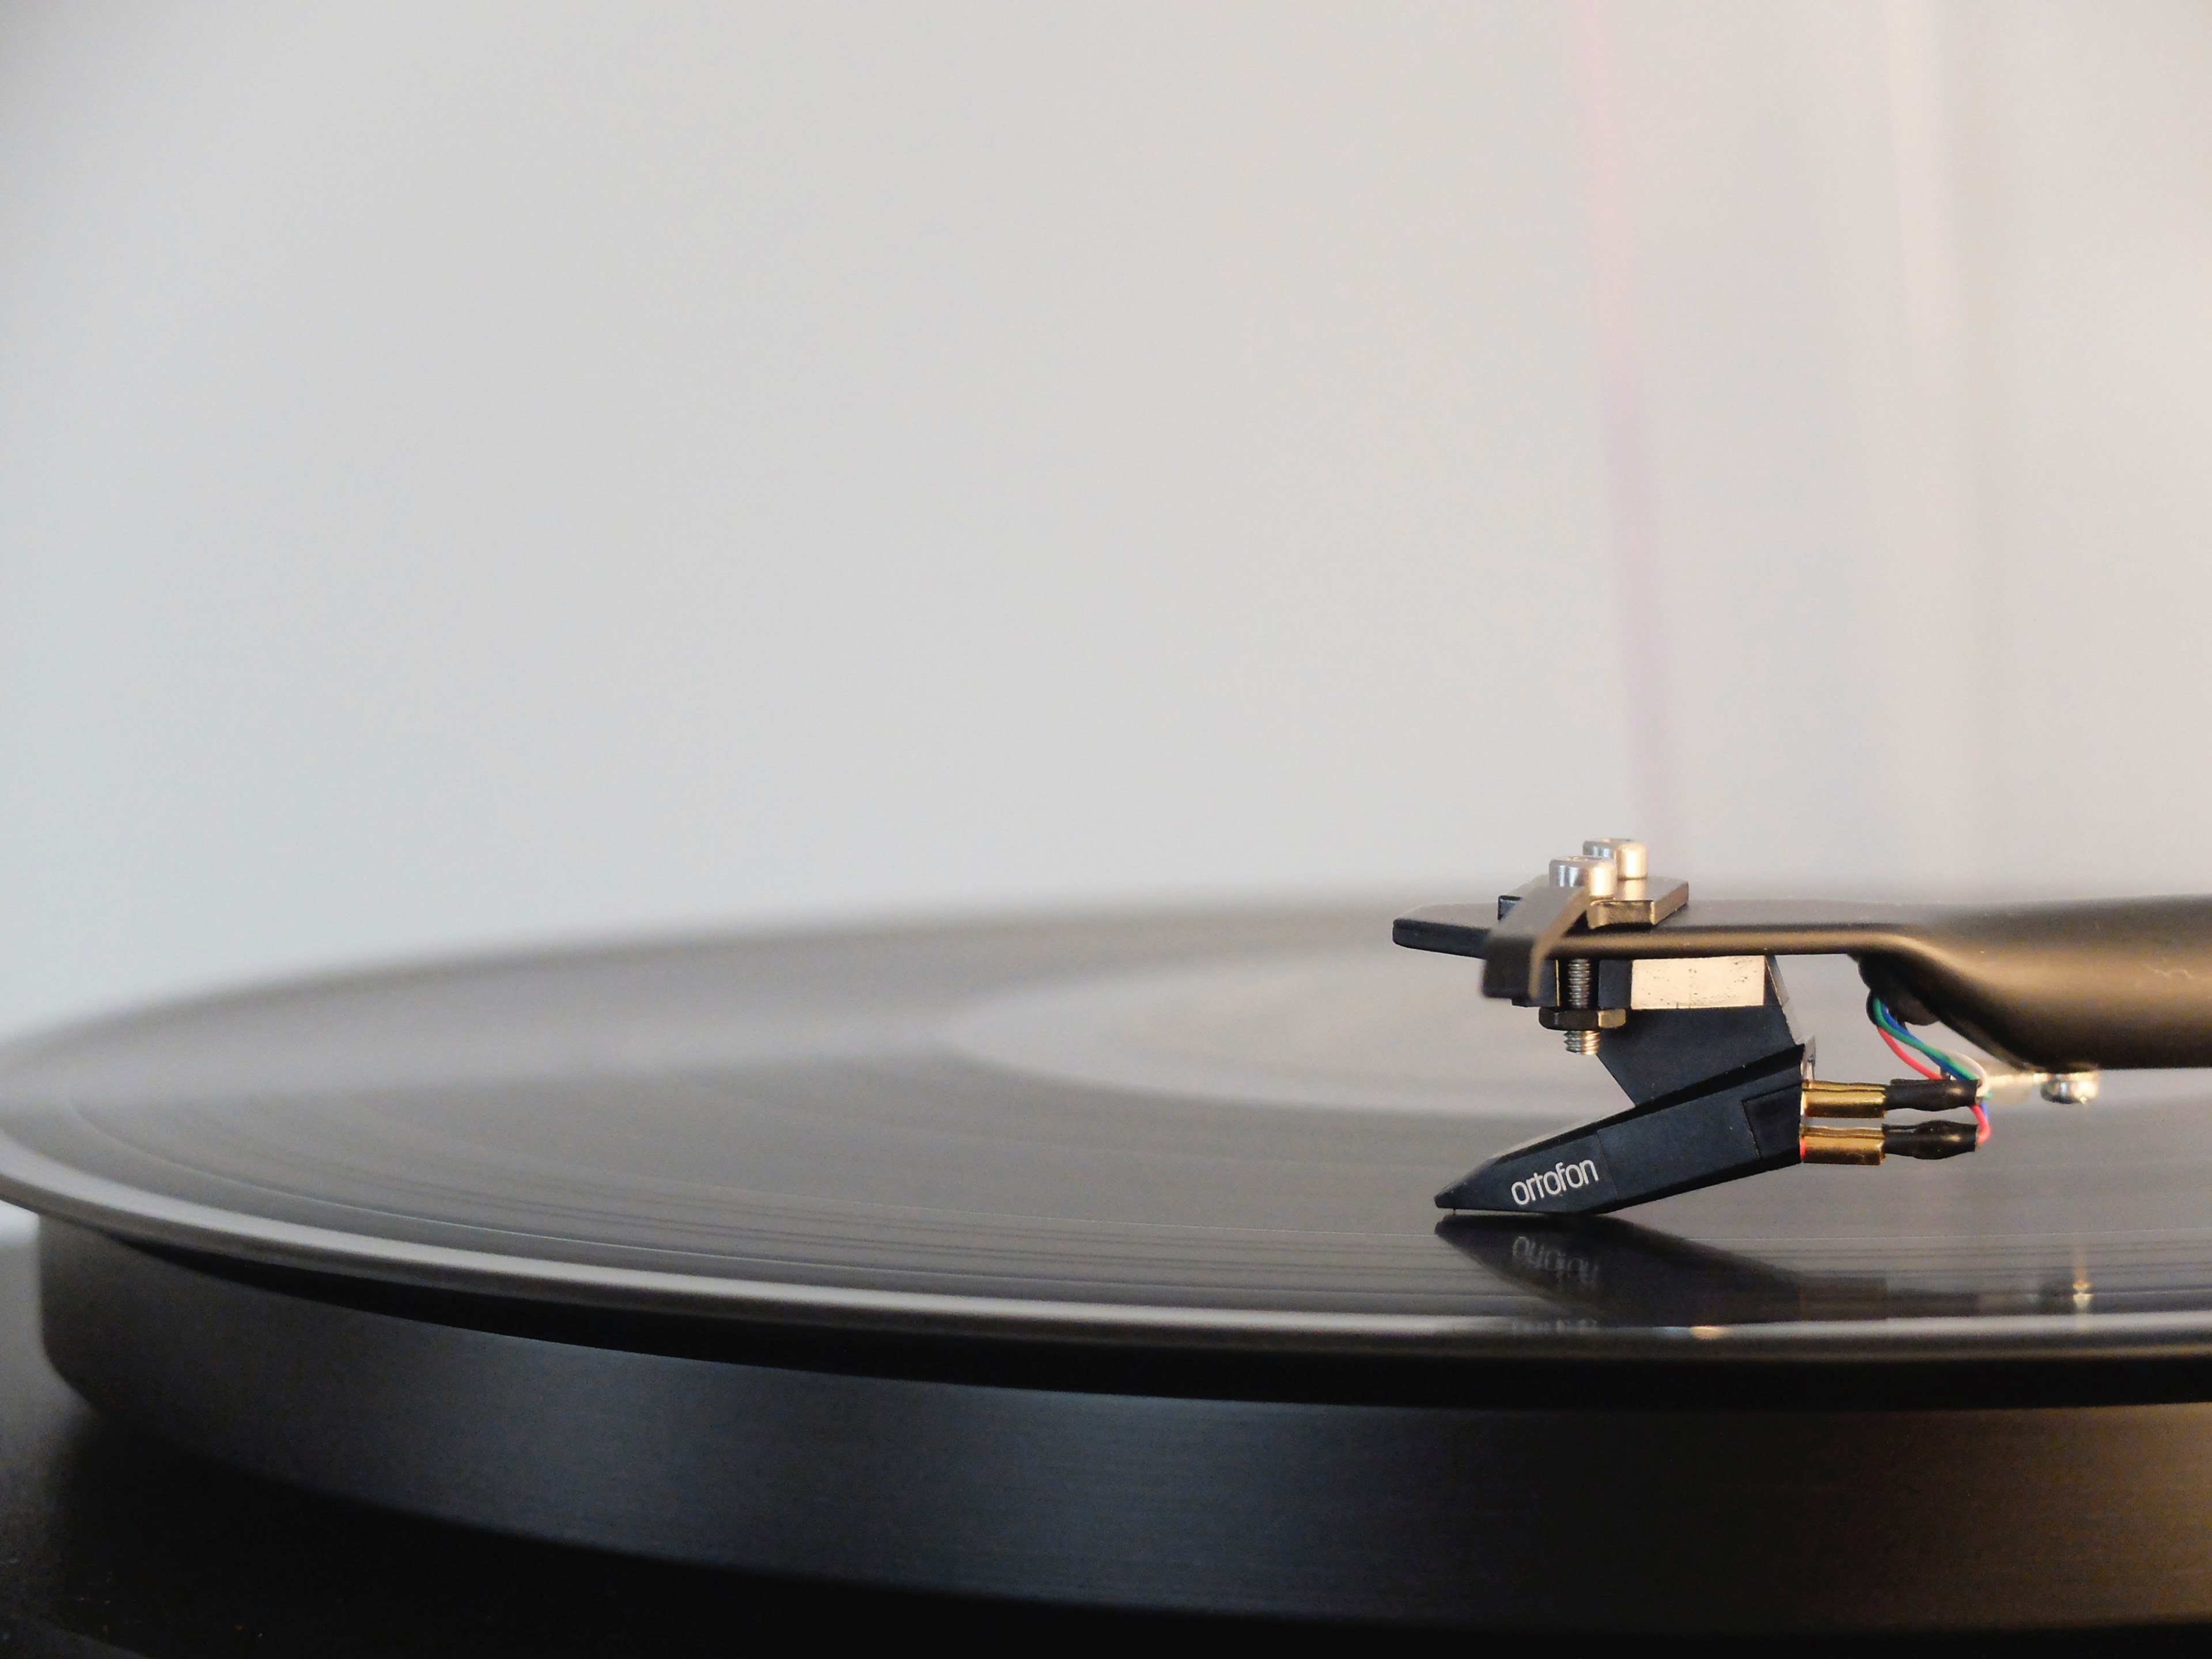 #3840x2880 Vinyl Record Player Lp And Turntable Hd - Vinyl Player Photography , HD Wallpaper & Backgrounds